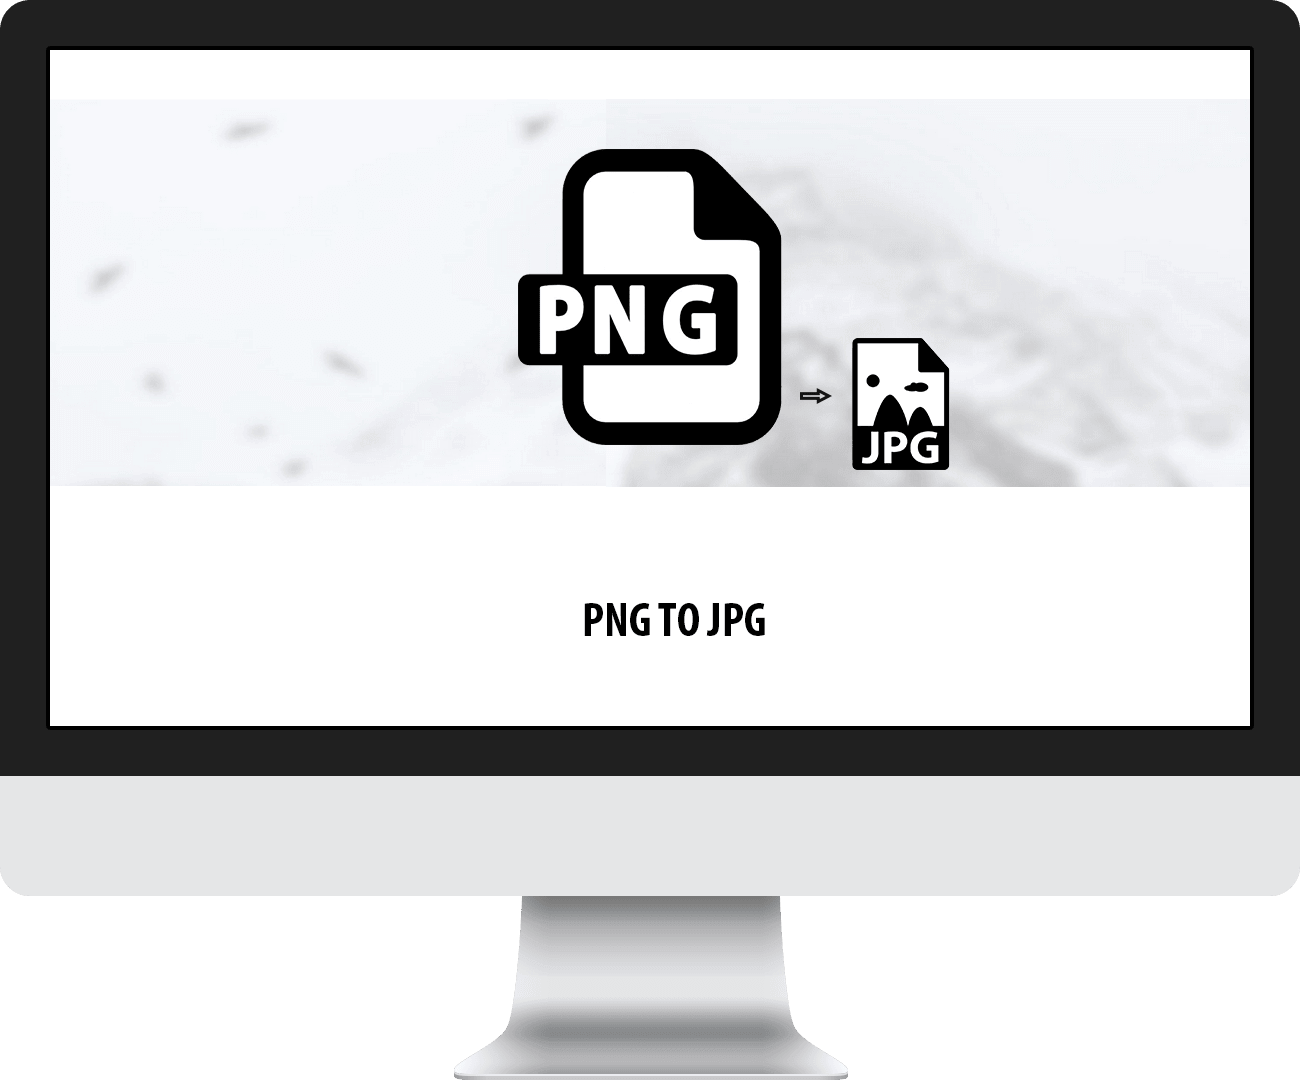 PNG TO JPG